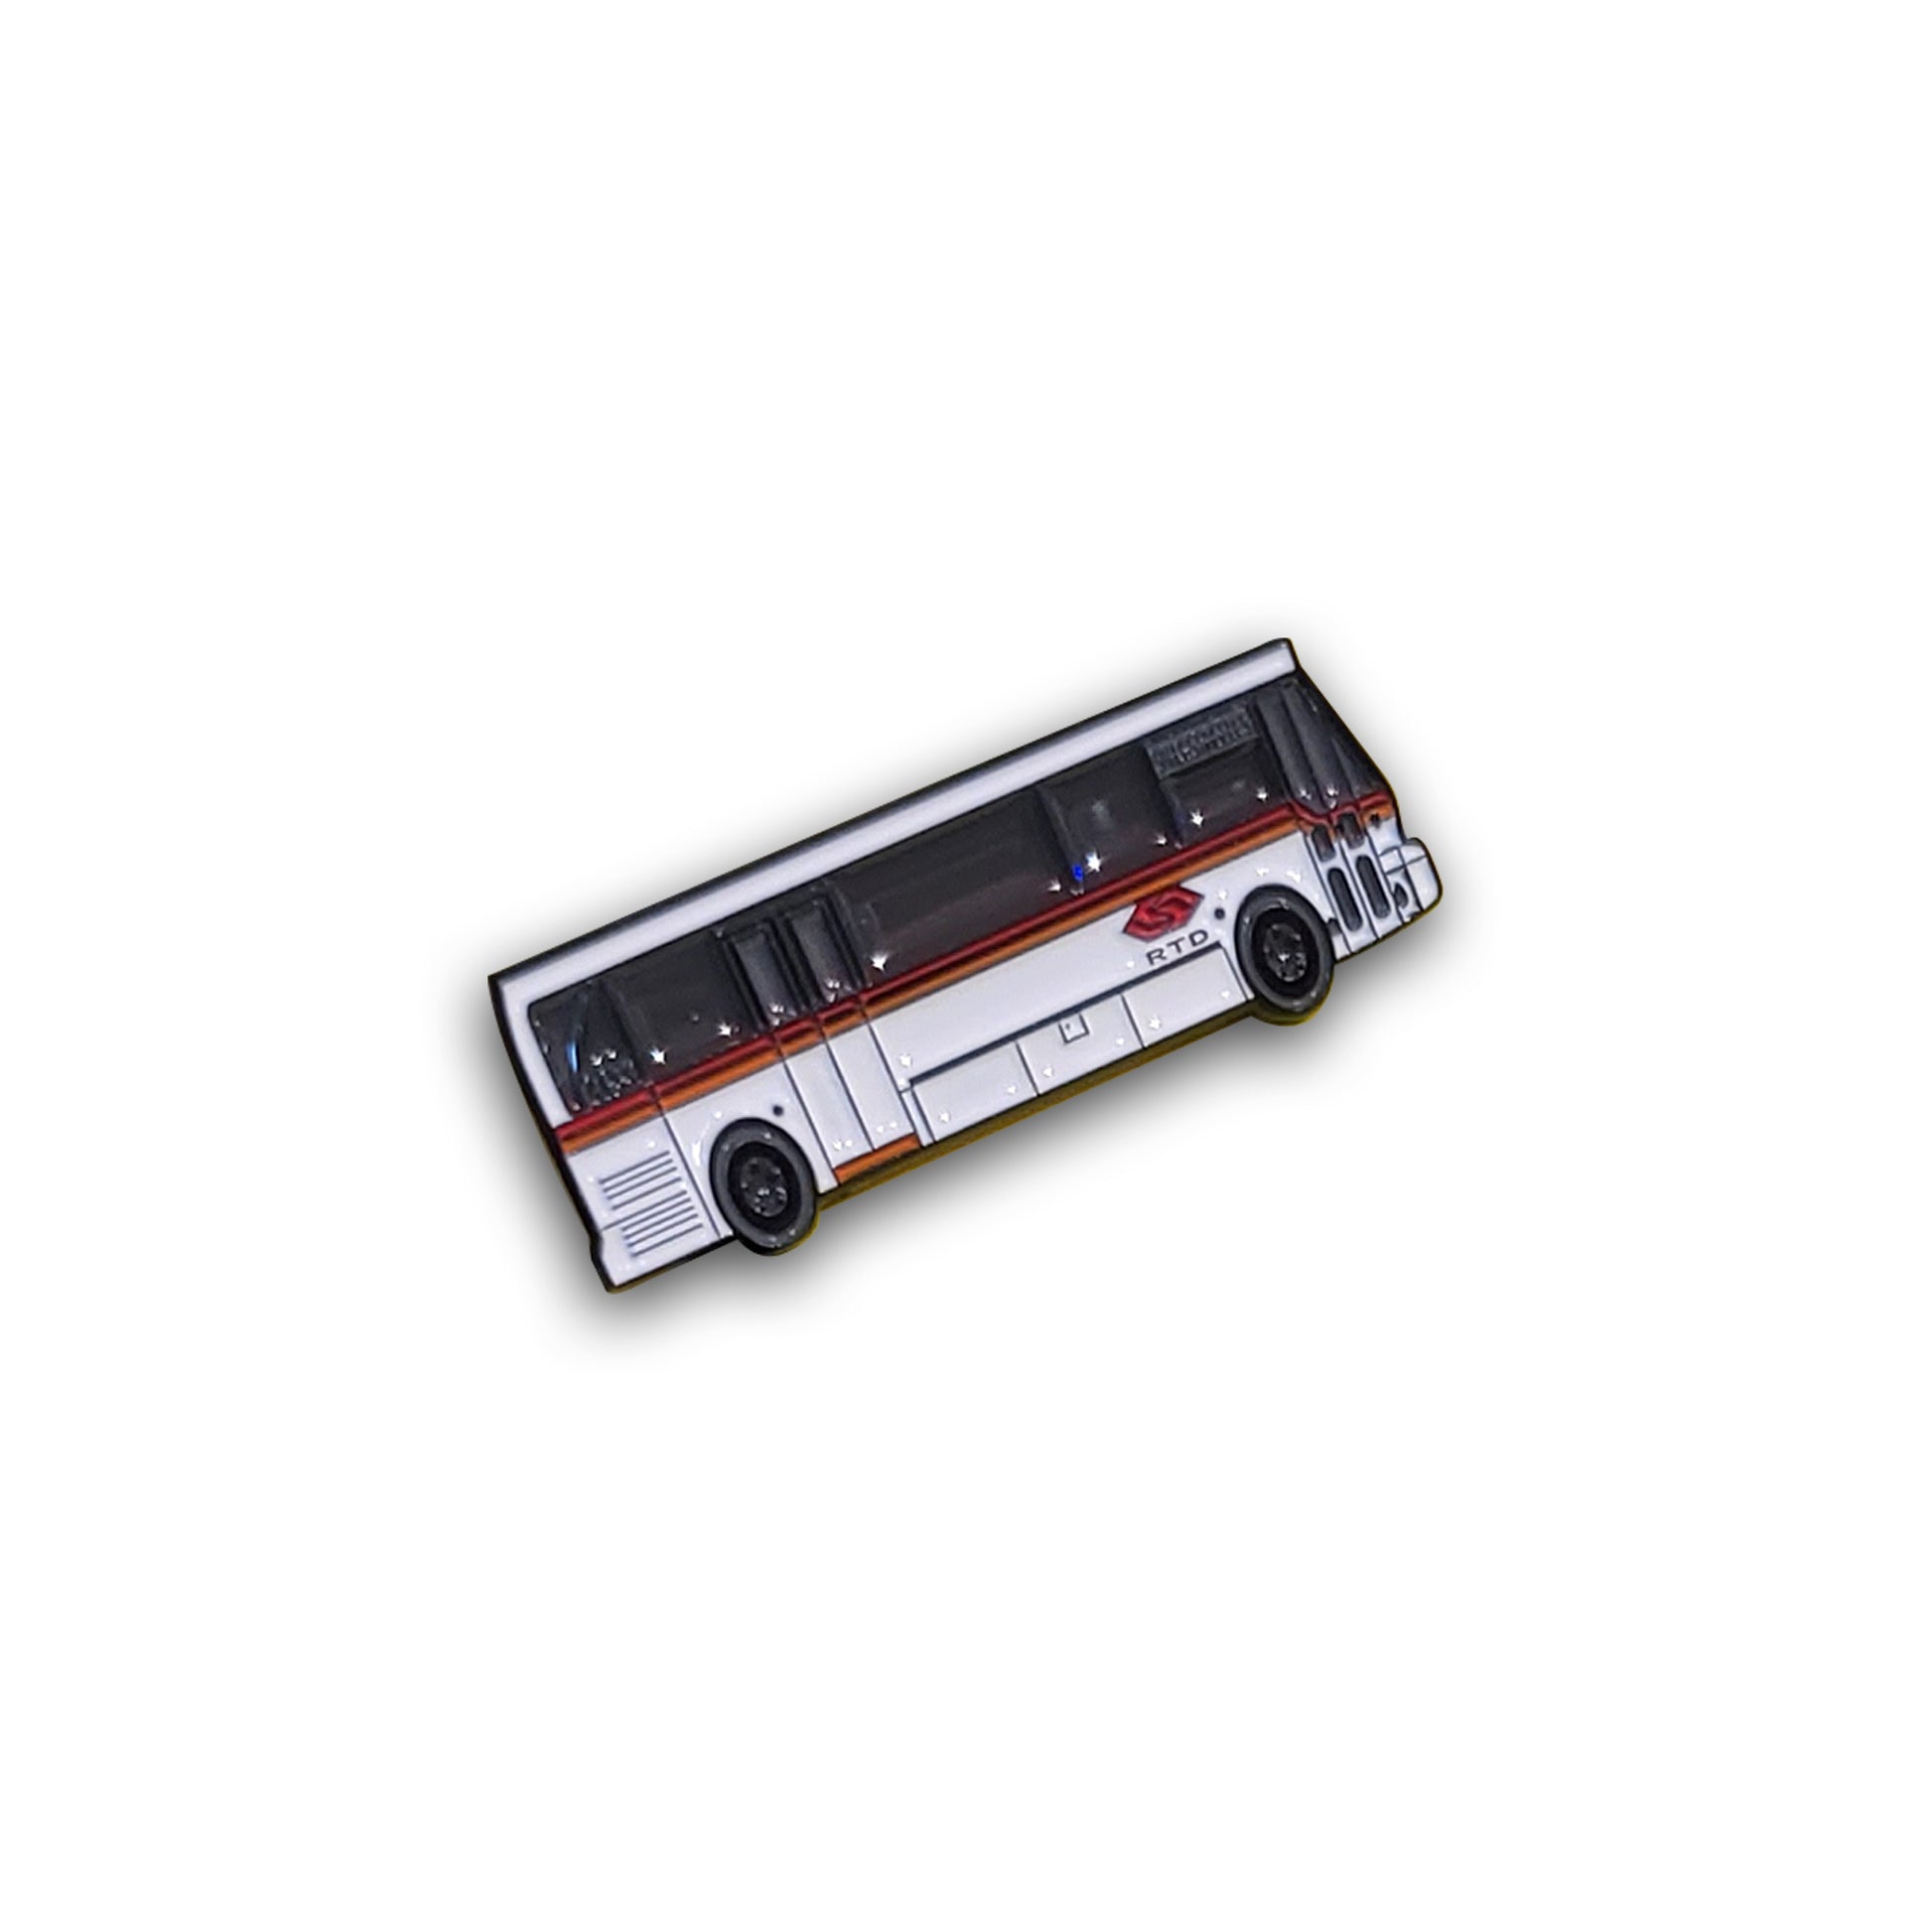 Drew One "City Bus Pin" on a white background